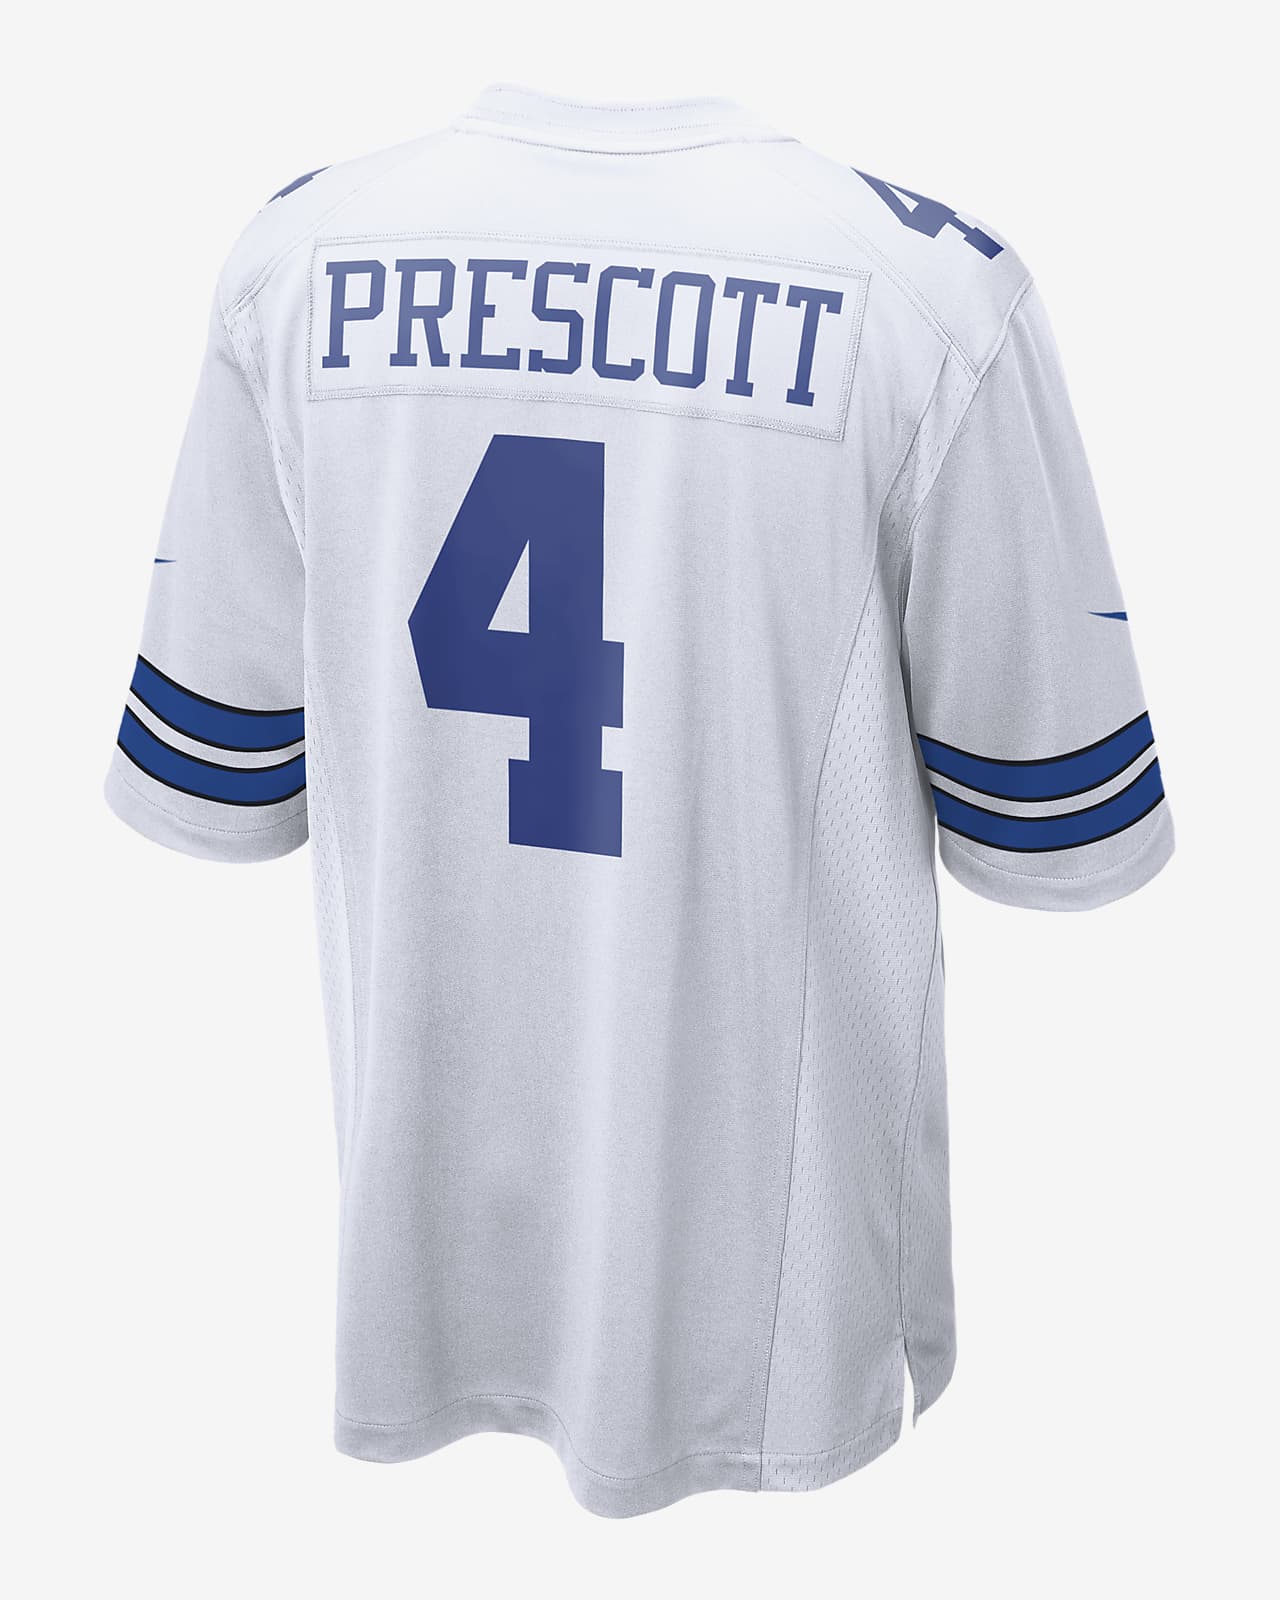 big and tall cowboys jersey